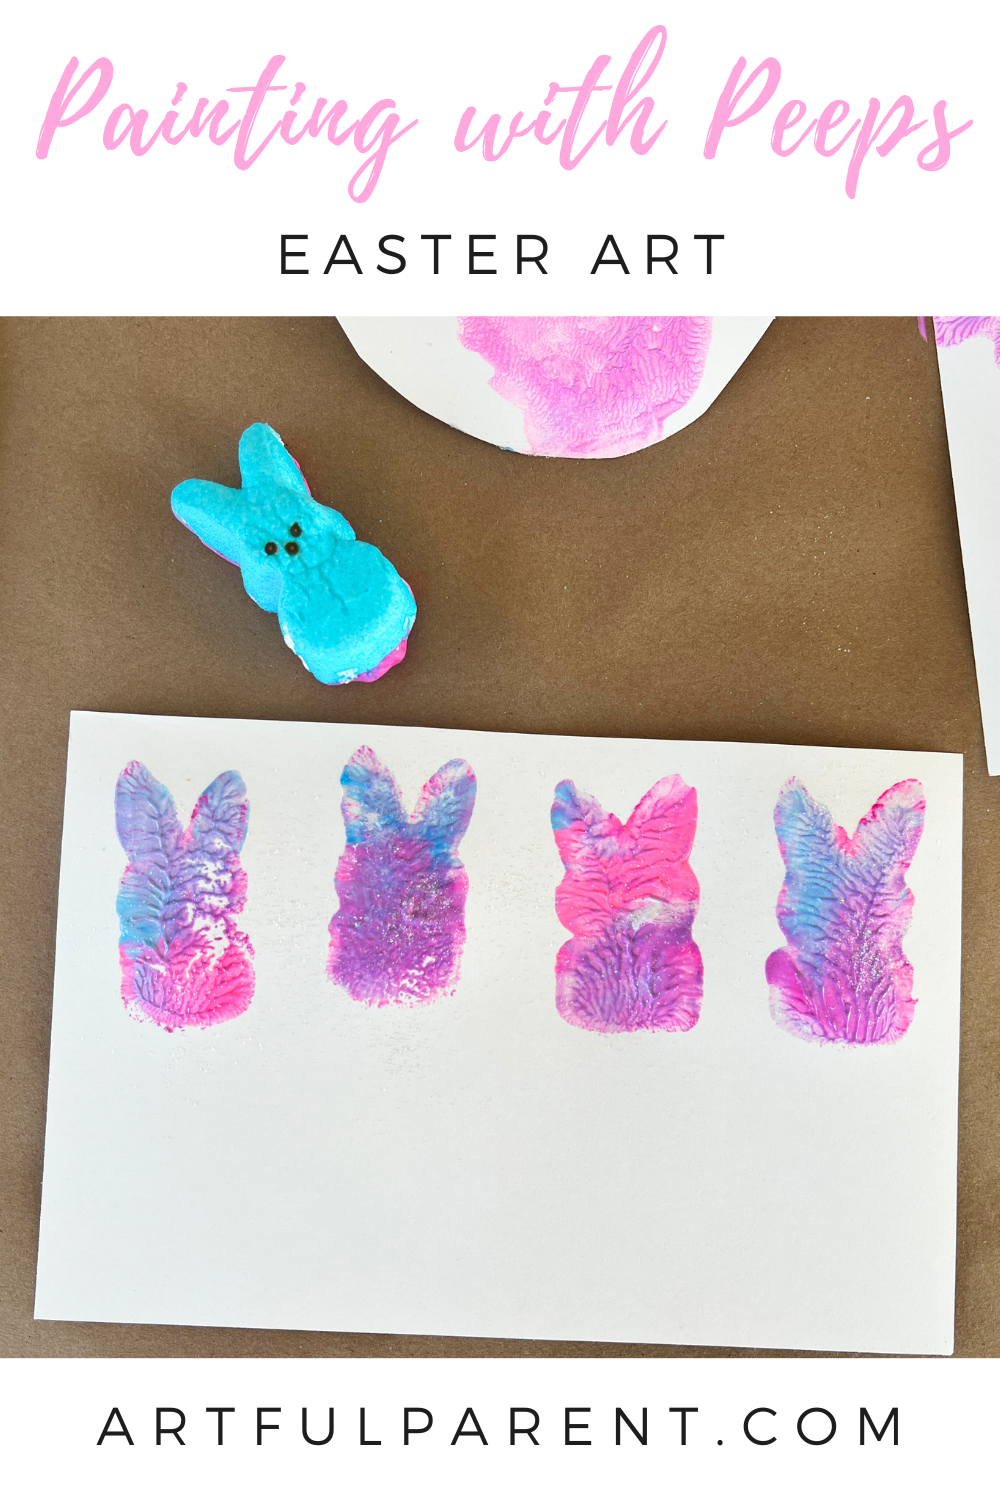 Painting with Peeps Easter Art